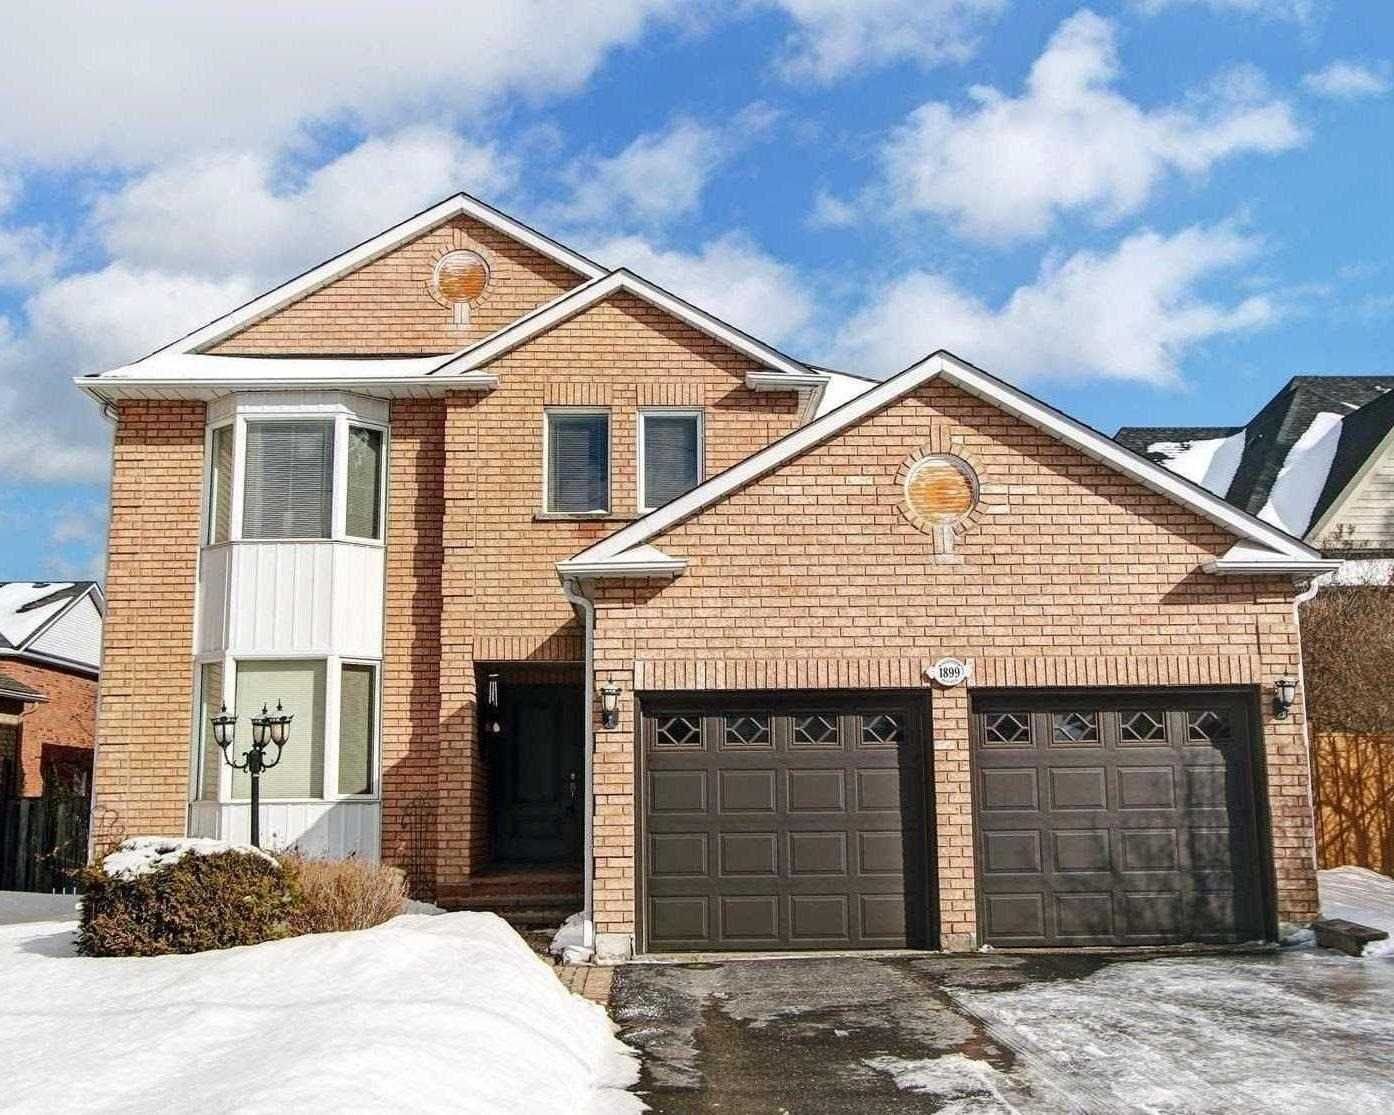 Main Photo: 1899 Woodview Avenue in Pickering: Freehold for sale : MLS®# E4359146